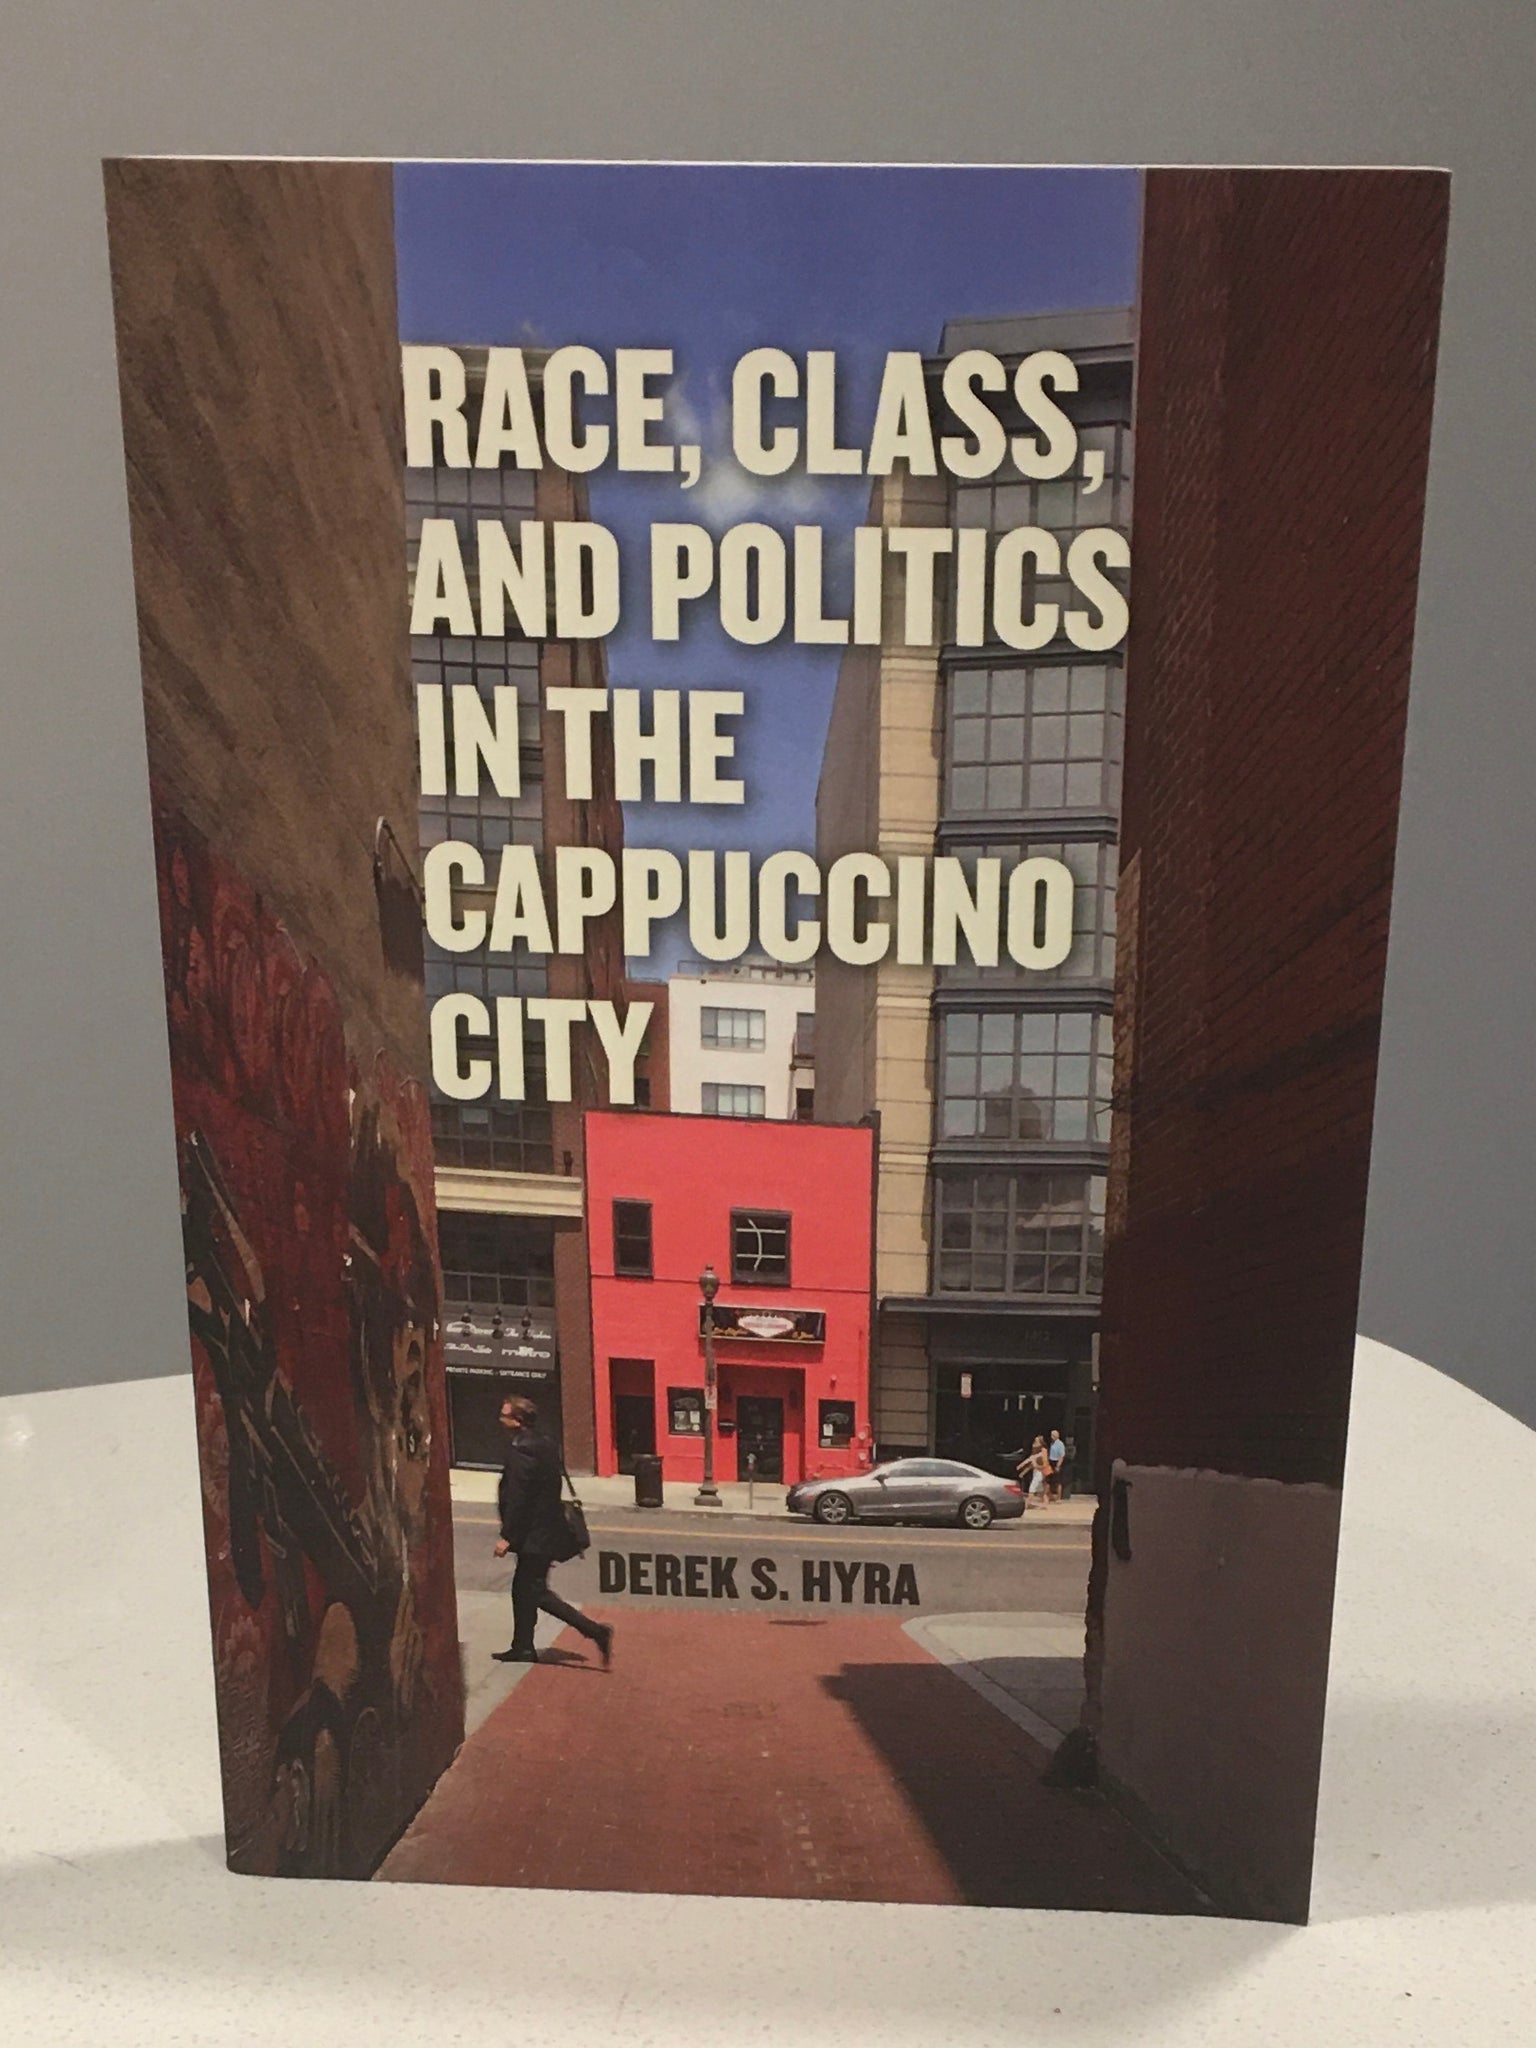 Race, Class and Politics in the Cappuccino City